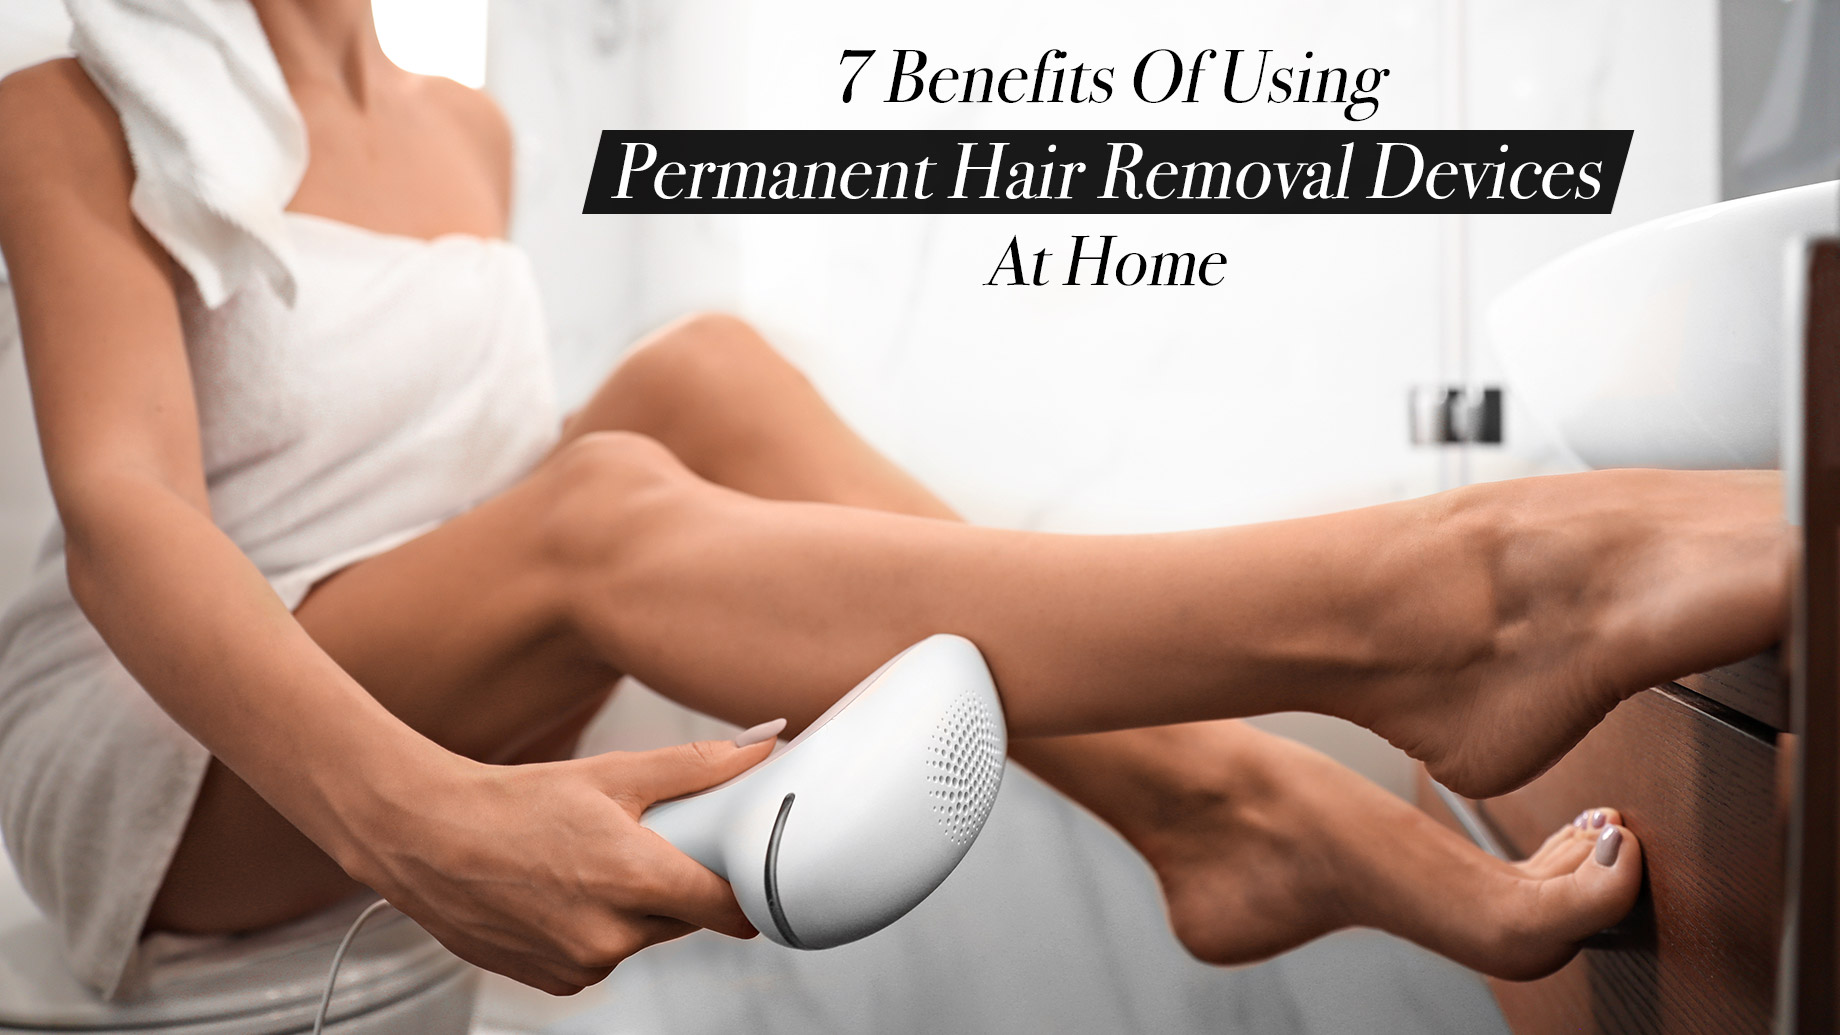 7 Benefits of Using Permanent Hair Removal Devices at Home